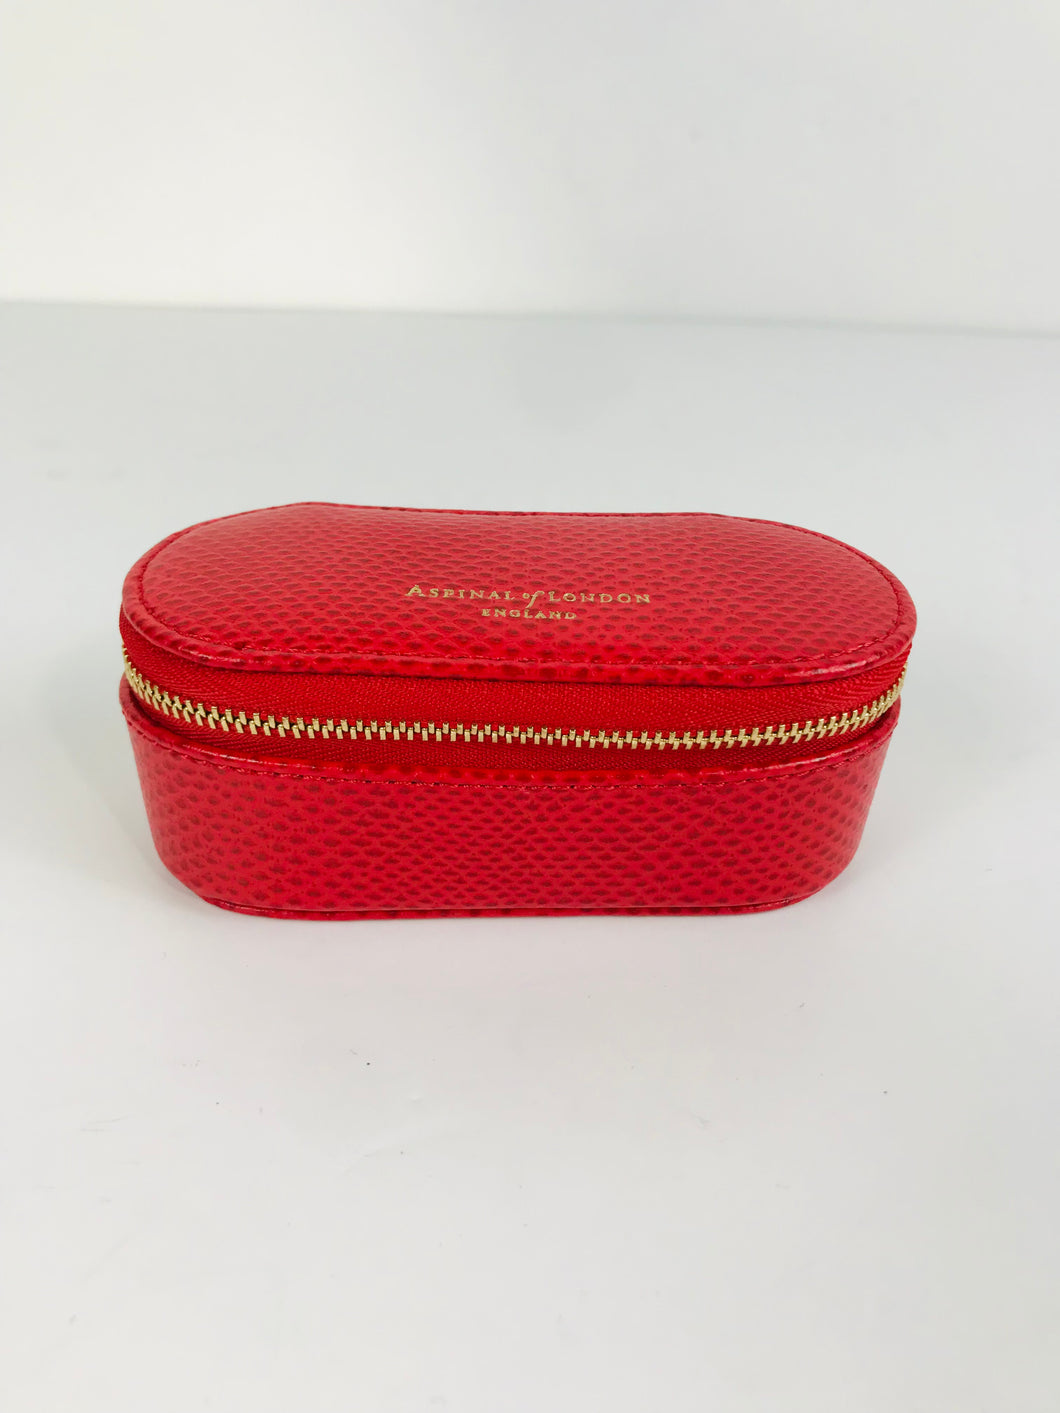 Aspinal of London Women's Makeup Pouch Purse | OS | Red